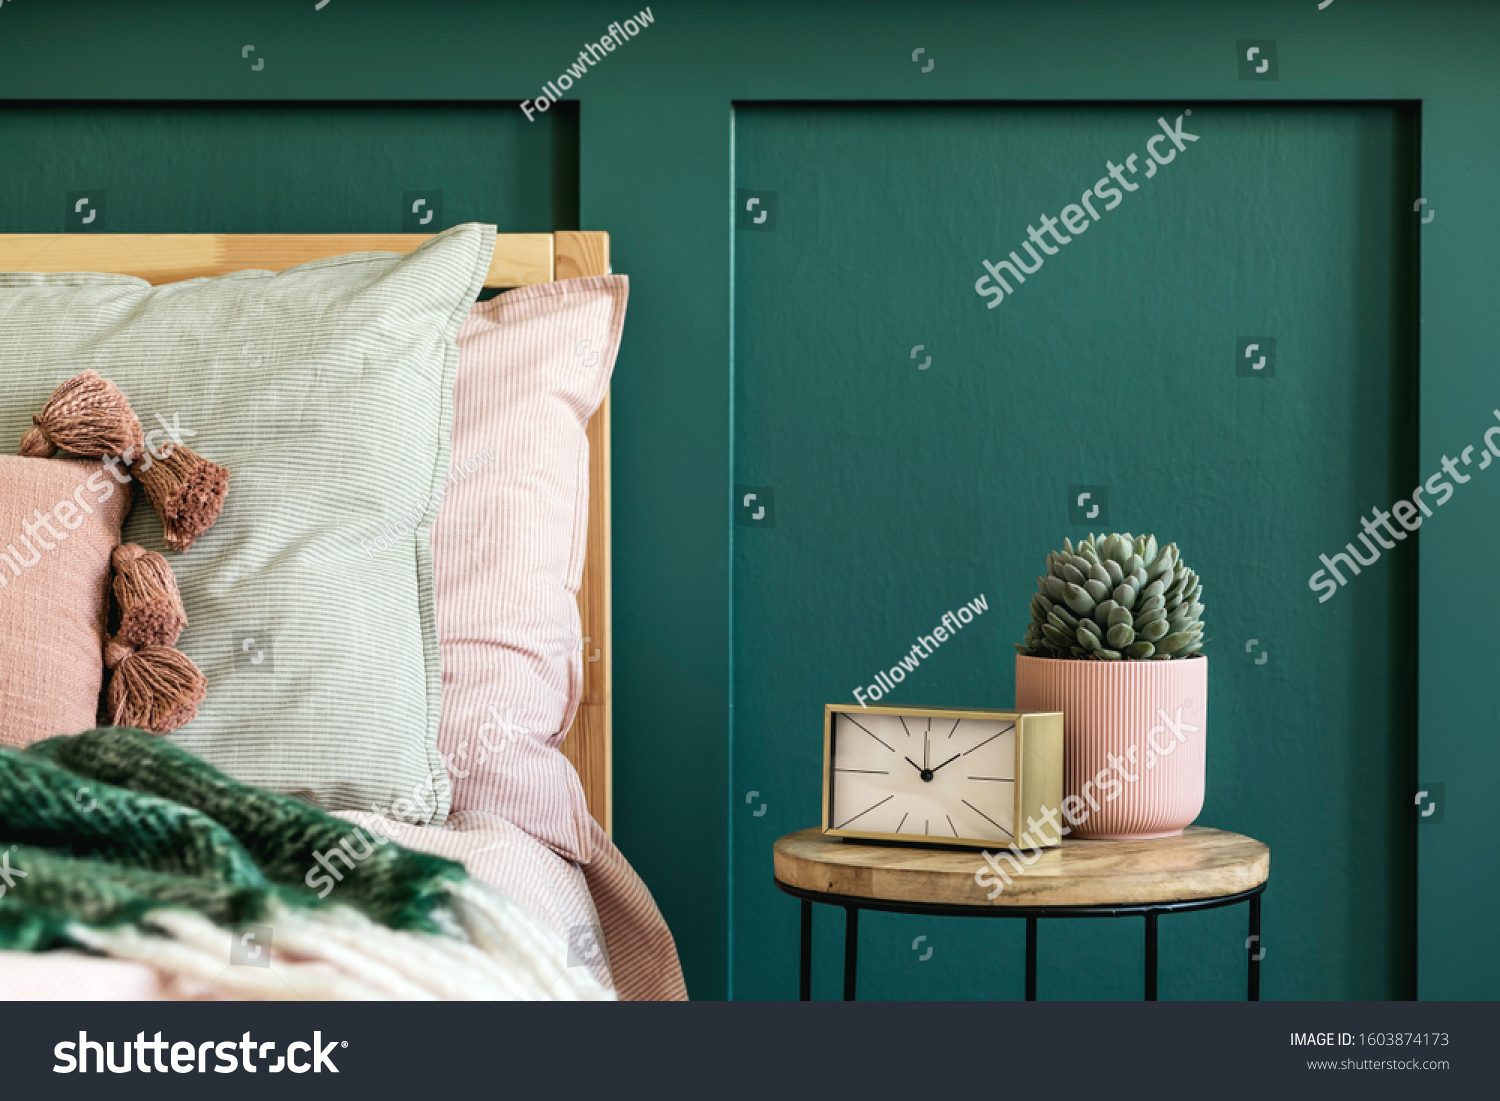 Stylish bedroom interior with design coffee table, plant, gold clock and elegant personal accessories. Beautiful bed sheets, blanket and pillows. Template. Modern home staging. Wall panelling. Details #1603874173